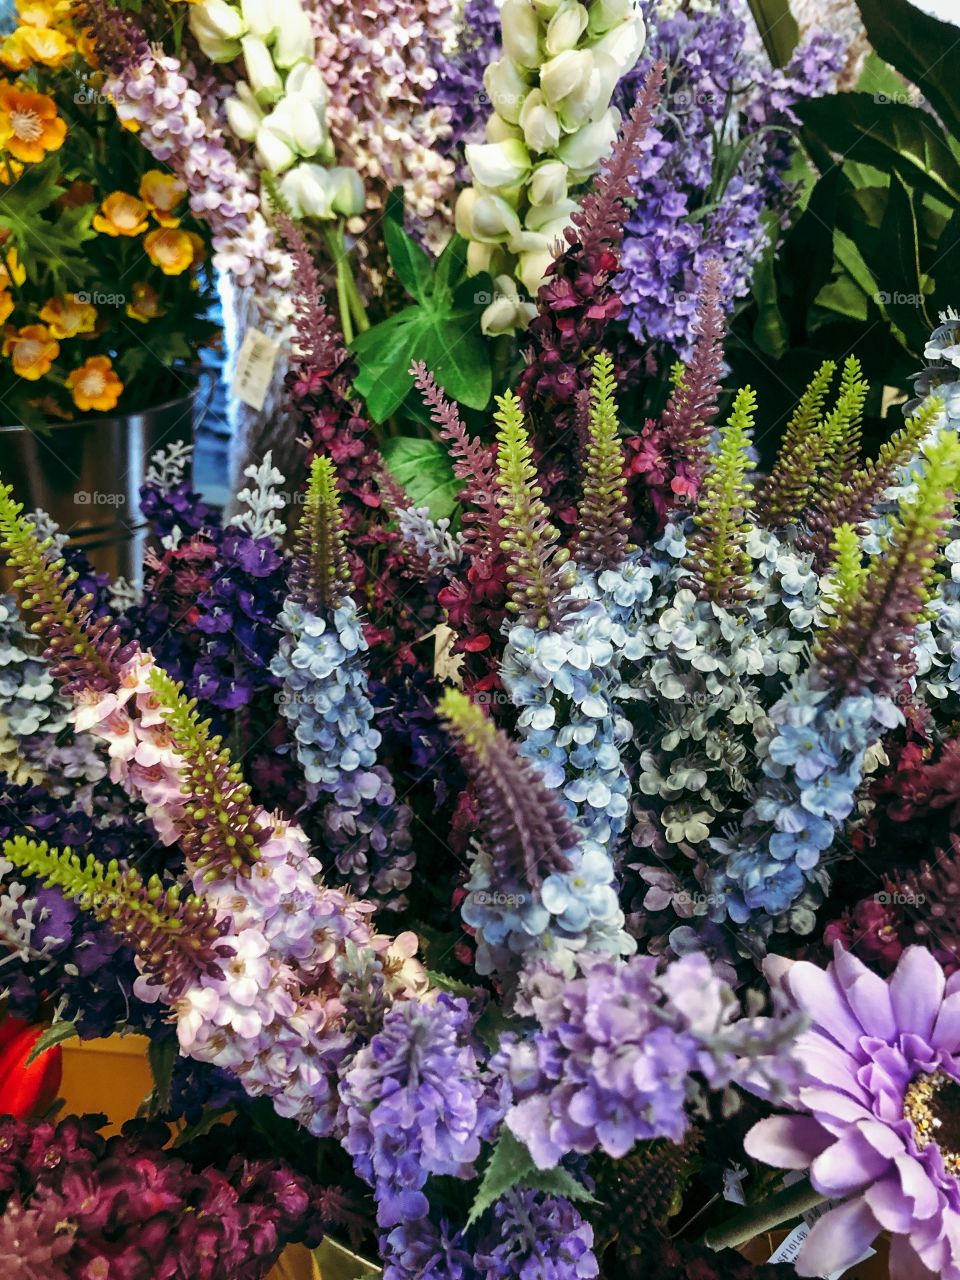 Some impressive array of dried flowers, what makes them so amazing is the sheer number of colorful stems.